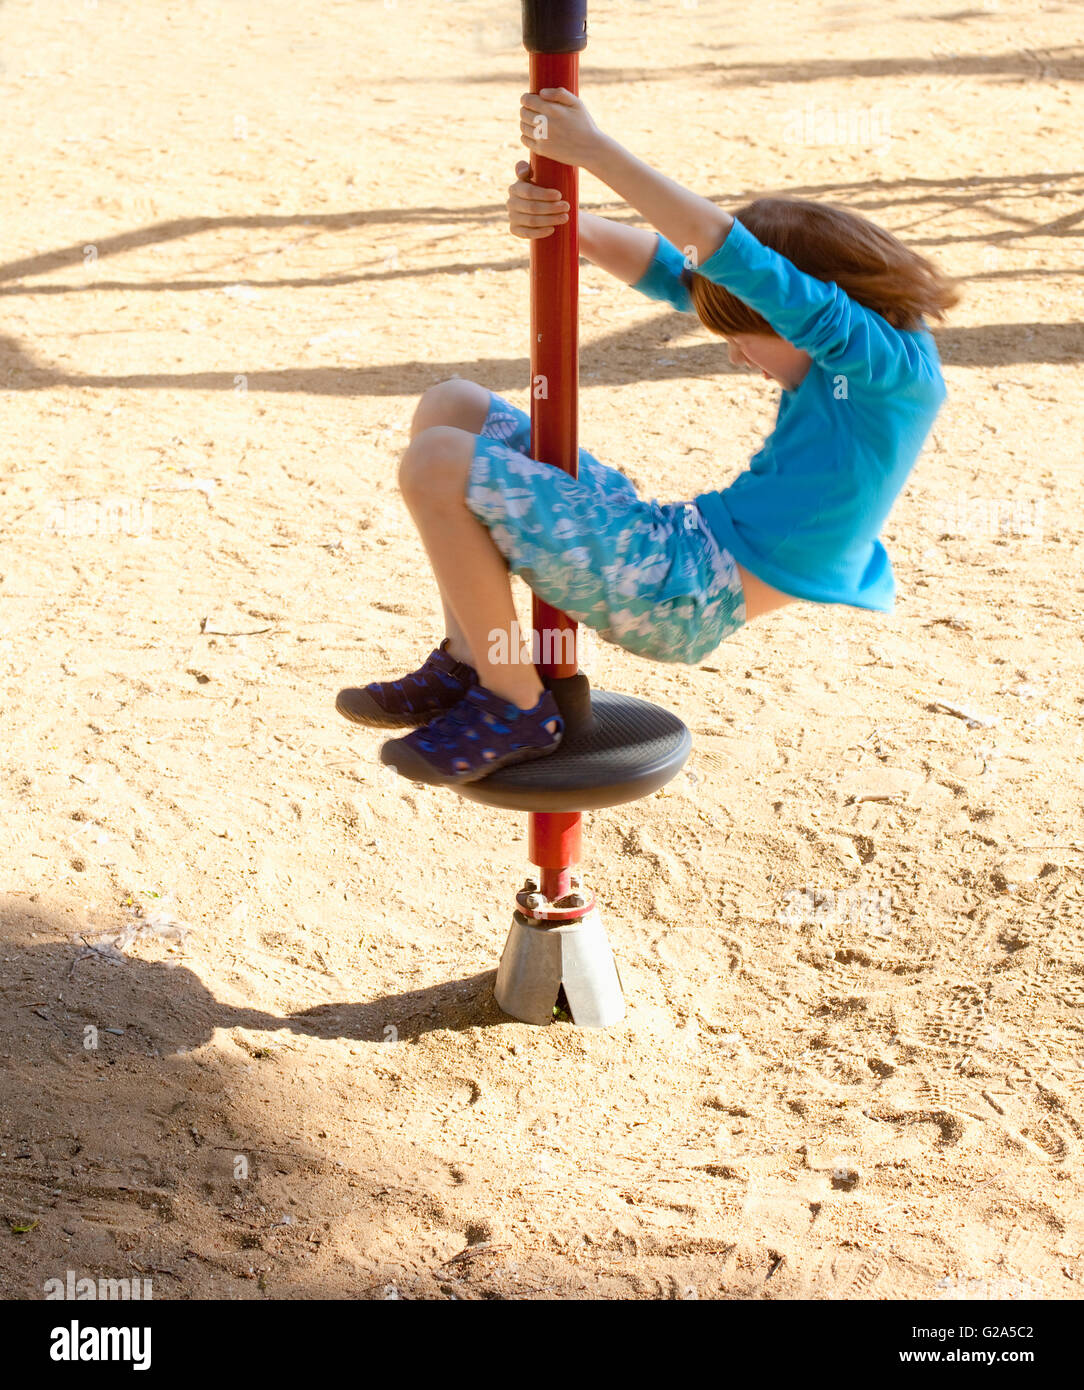 Boy with Blond Hair Spinning on a Pole at Playground Stock Photo